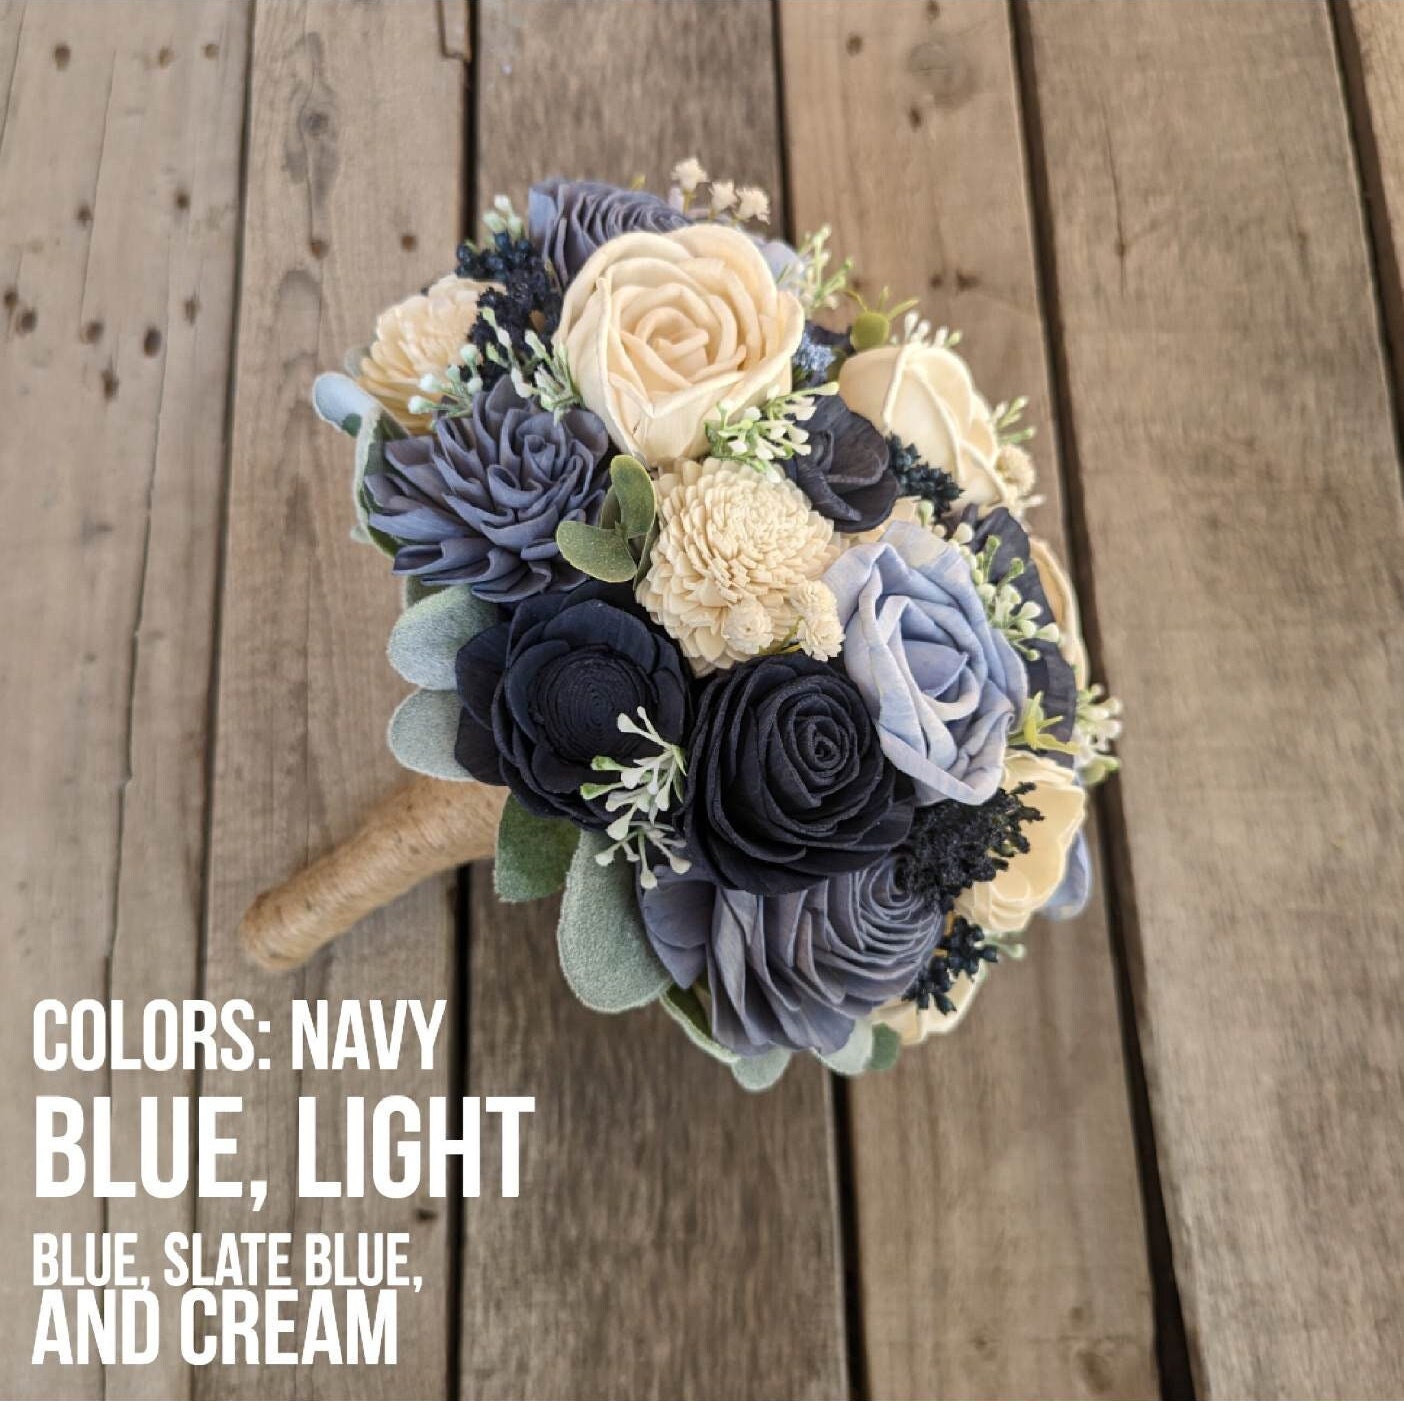 Blue Wedding Bouquet with Wood Flowers, Wooden Flower Bouquet, Sola Wood Flowers Bridal Bouquet